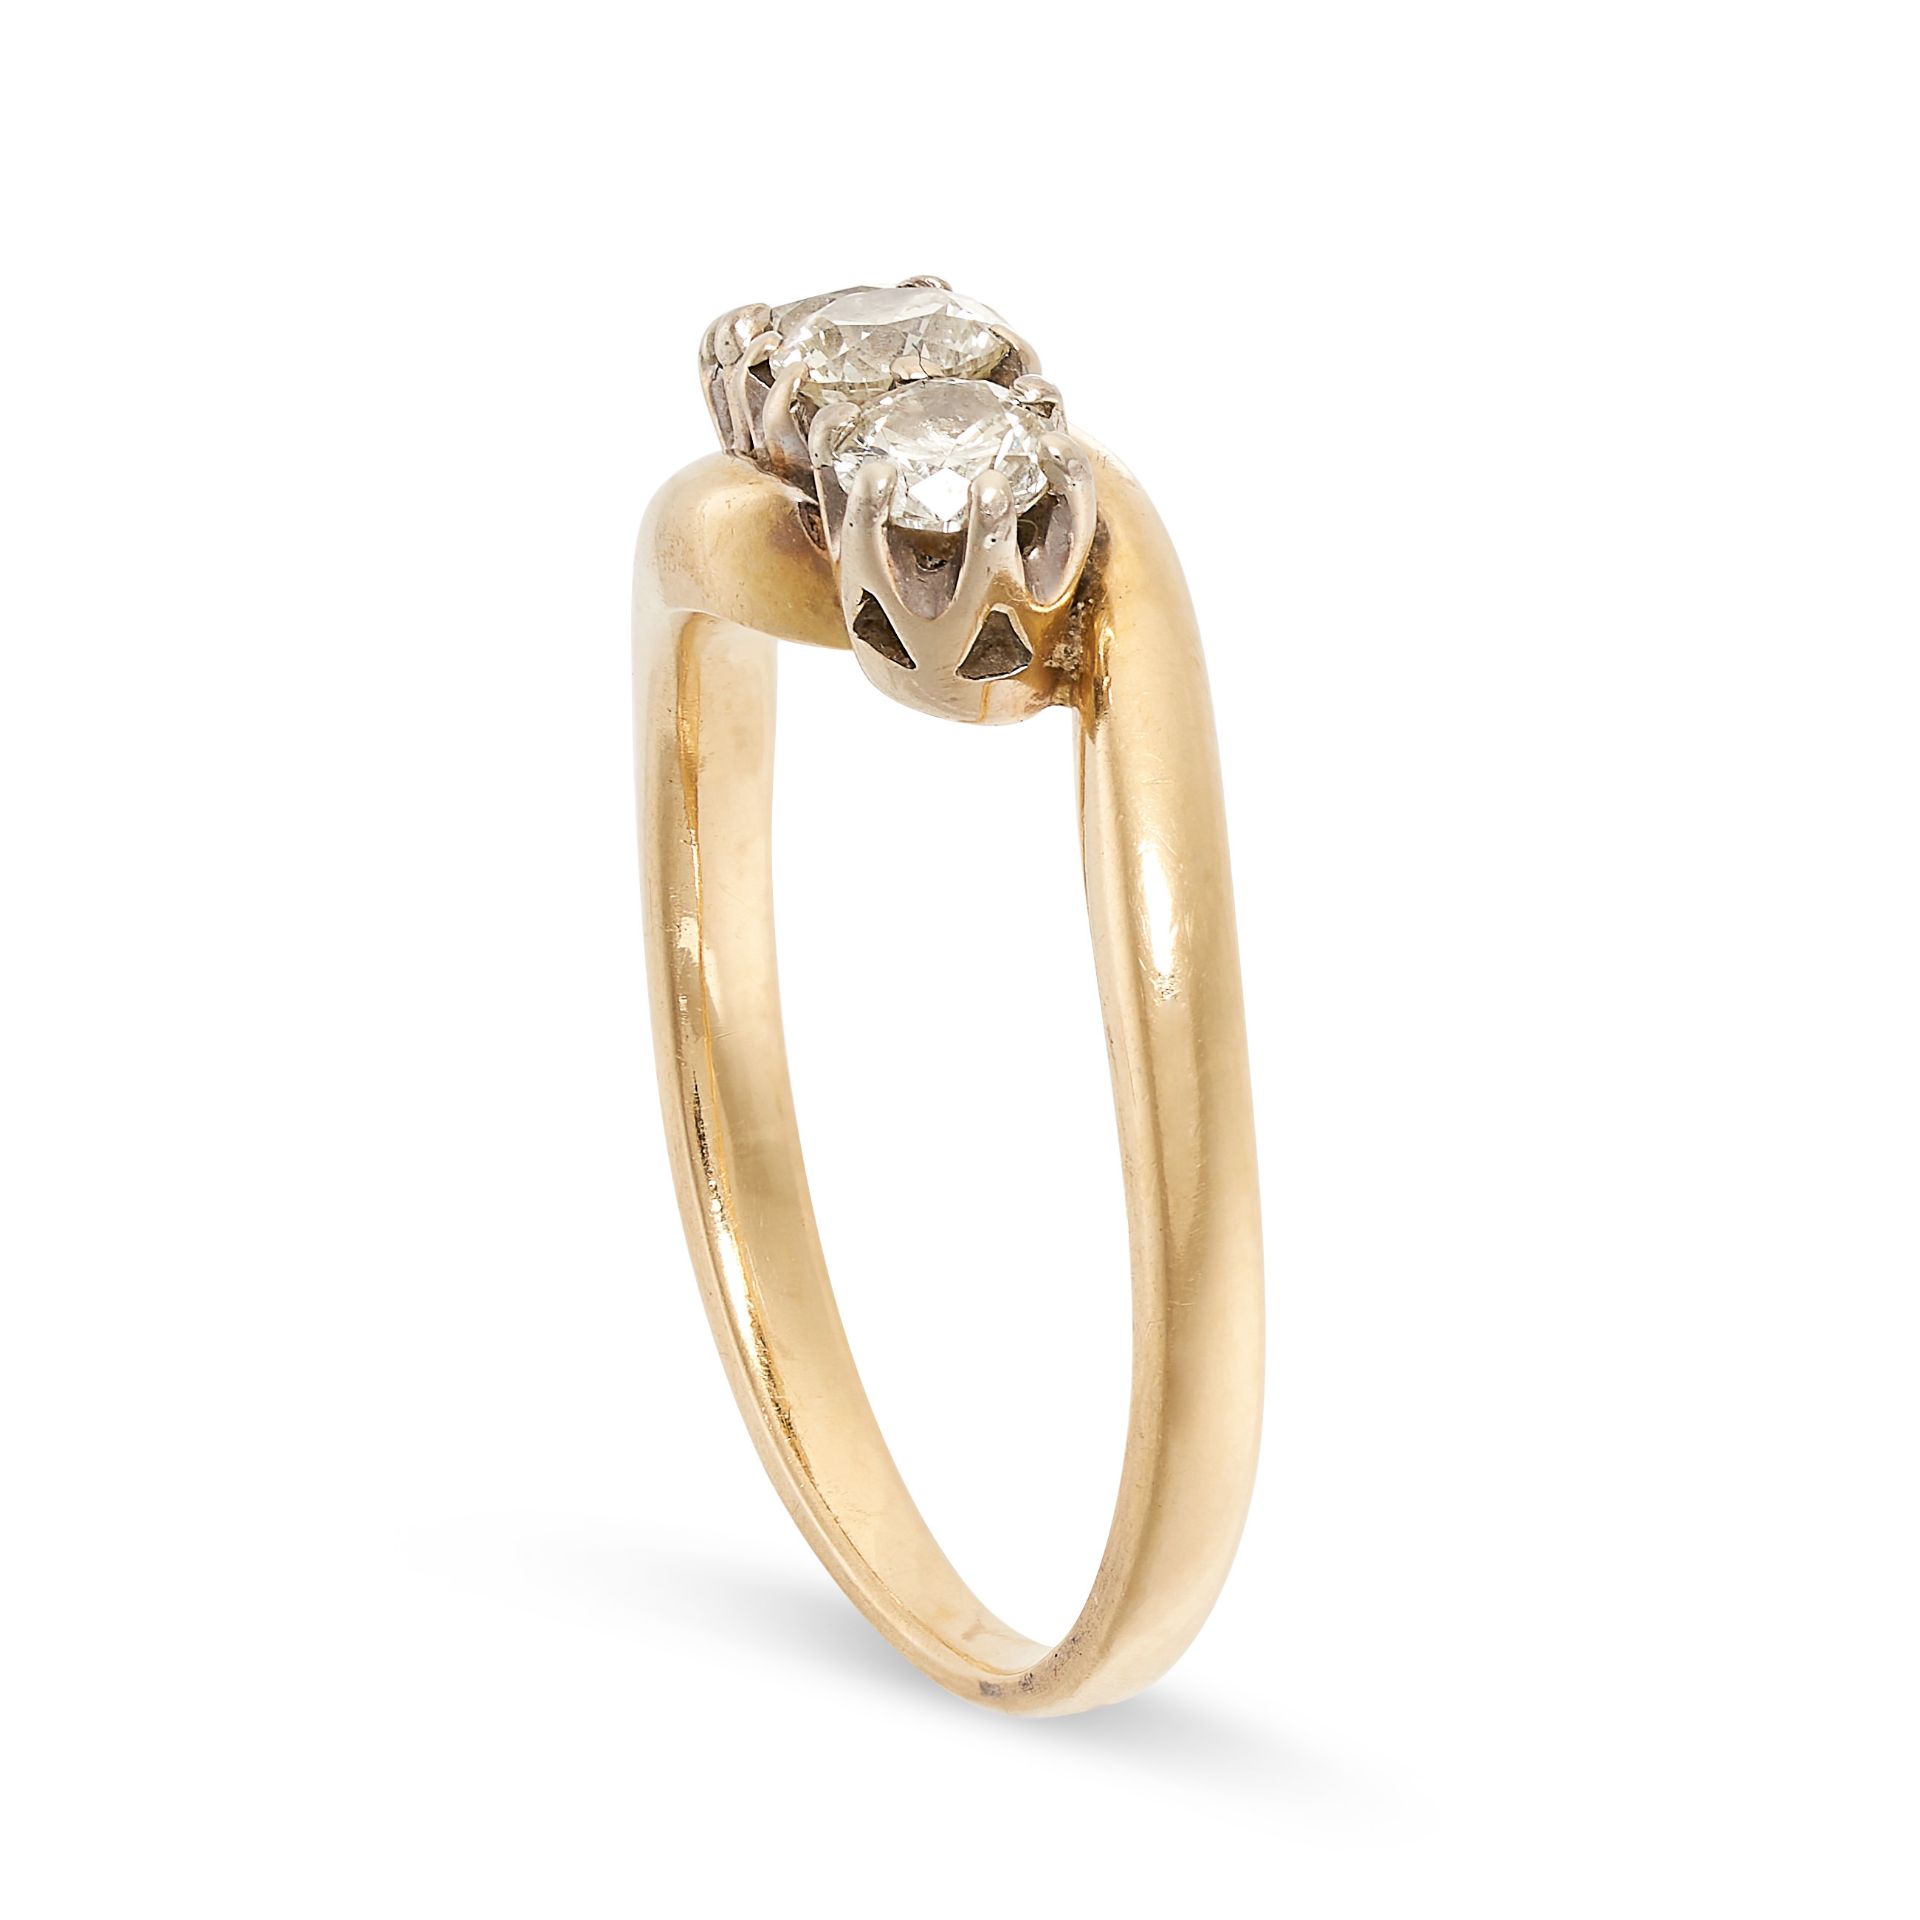 NO RESERVE - A DIAMOND THREE STONE RING in 18ct yellow gold, set with three graduated round brill... - Image 2 of 2